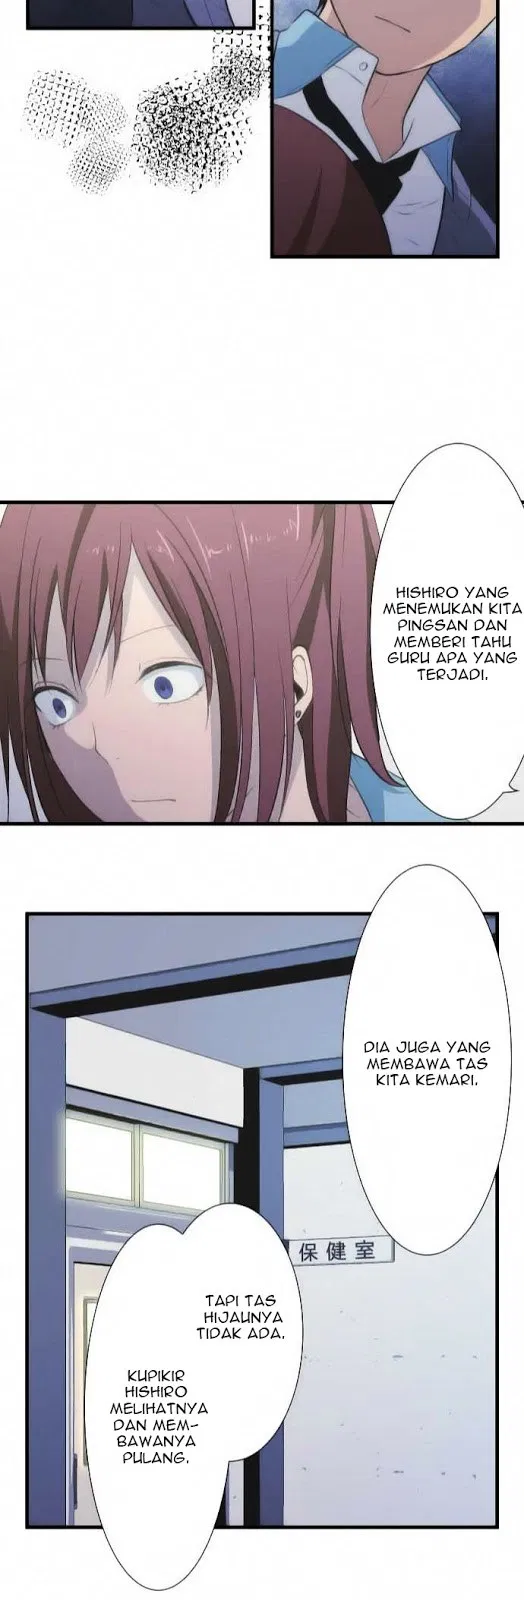 ReLIFE Chapter 38